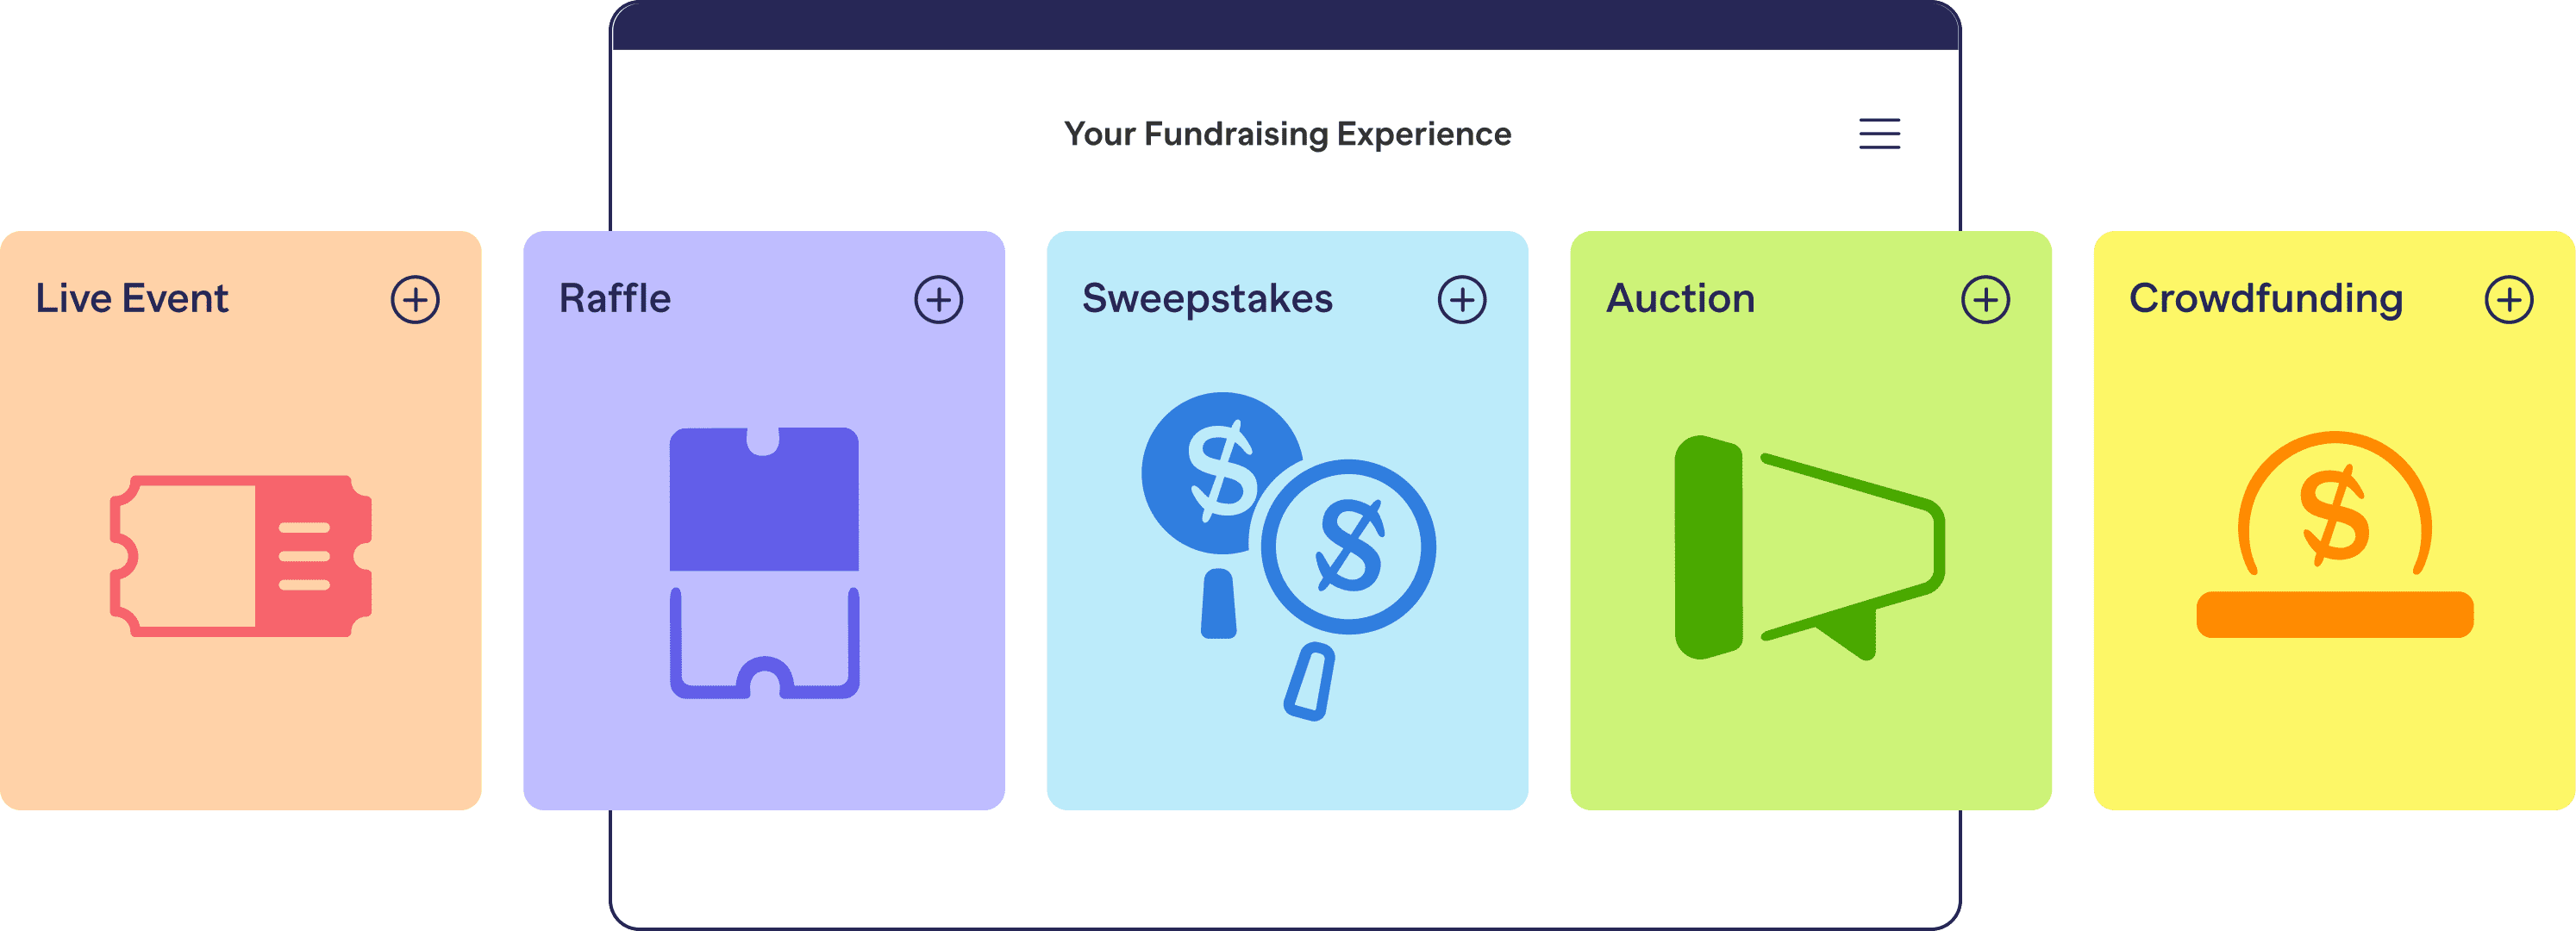 Fundraising Experience cards Crowdfunding